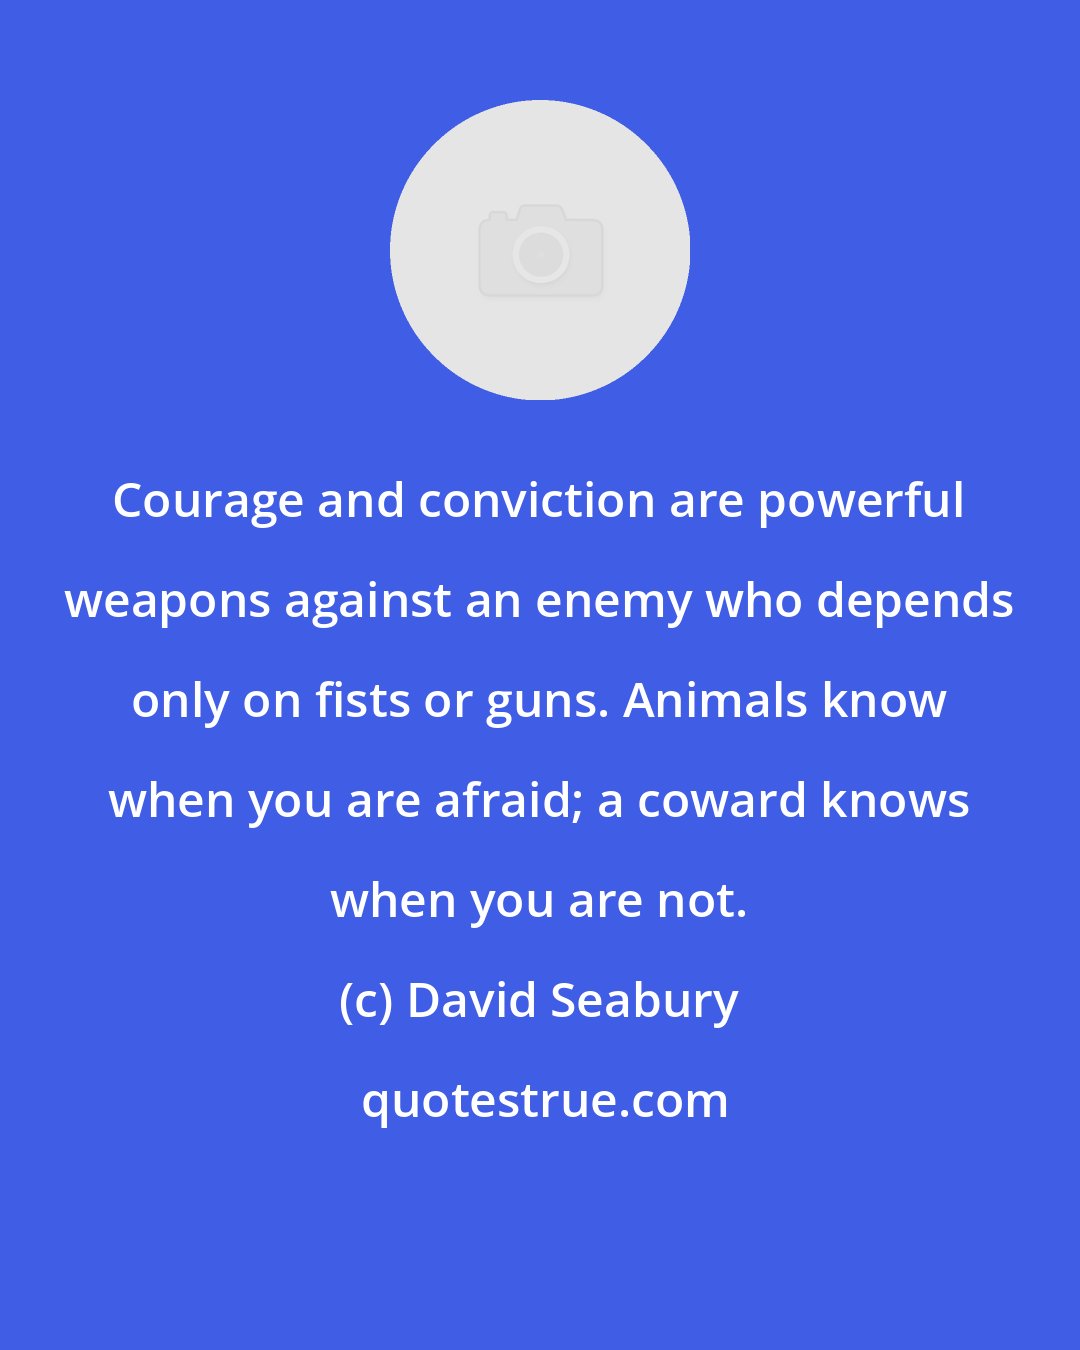 David Seabury: Courage and conviction are powerful weapons against an enemy who depends only on fists or guns. Animals know when you are afraid; a coward knows when you are not.